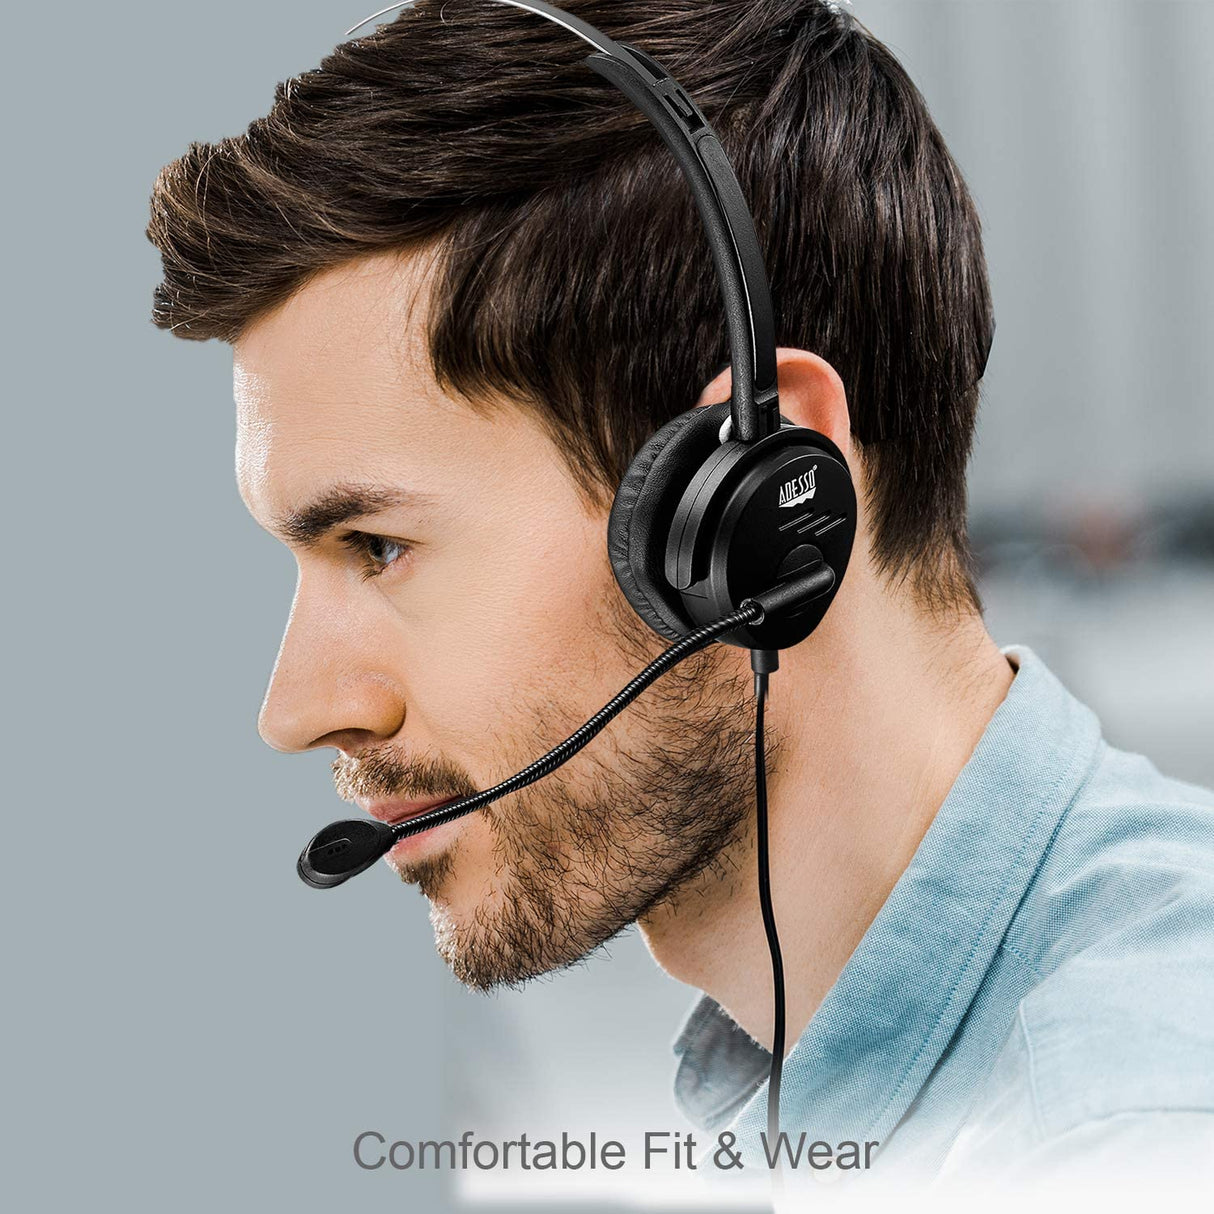 Adesso Xtream P1 Single-Sided USB Wired Headset with Adjustable Noise Canceling Microphone - Dealtargets.com